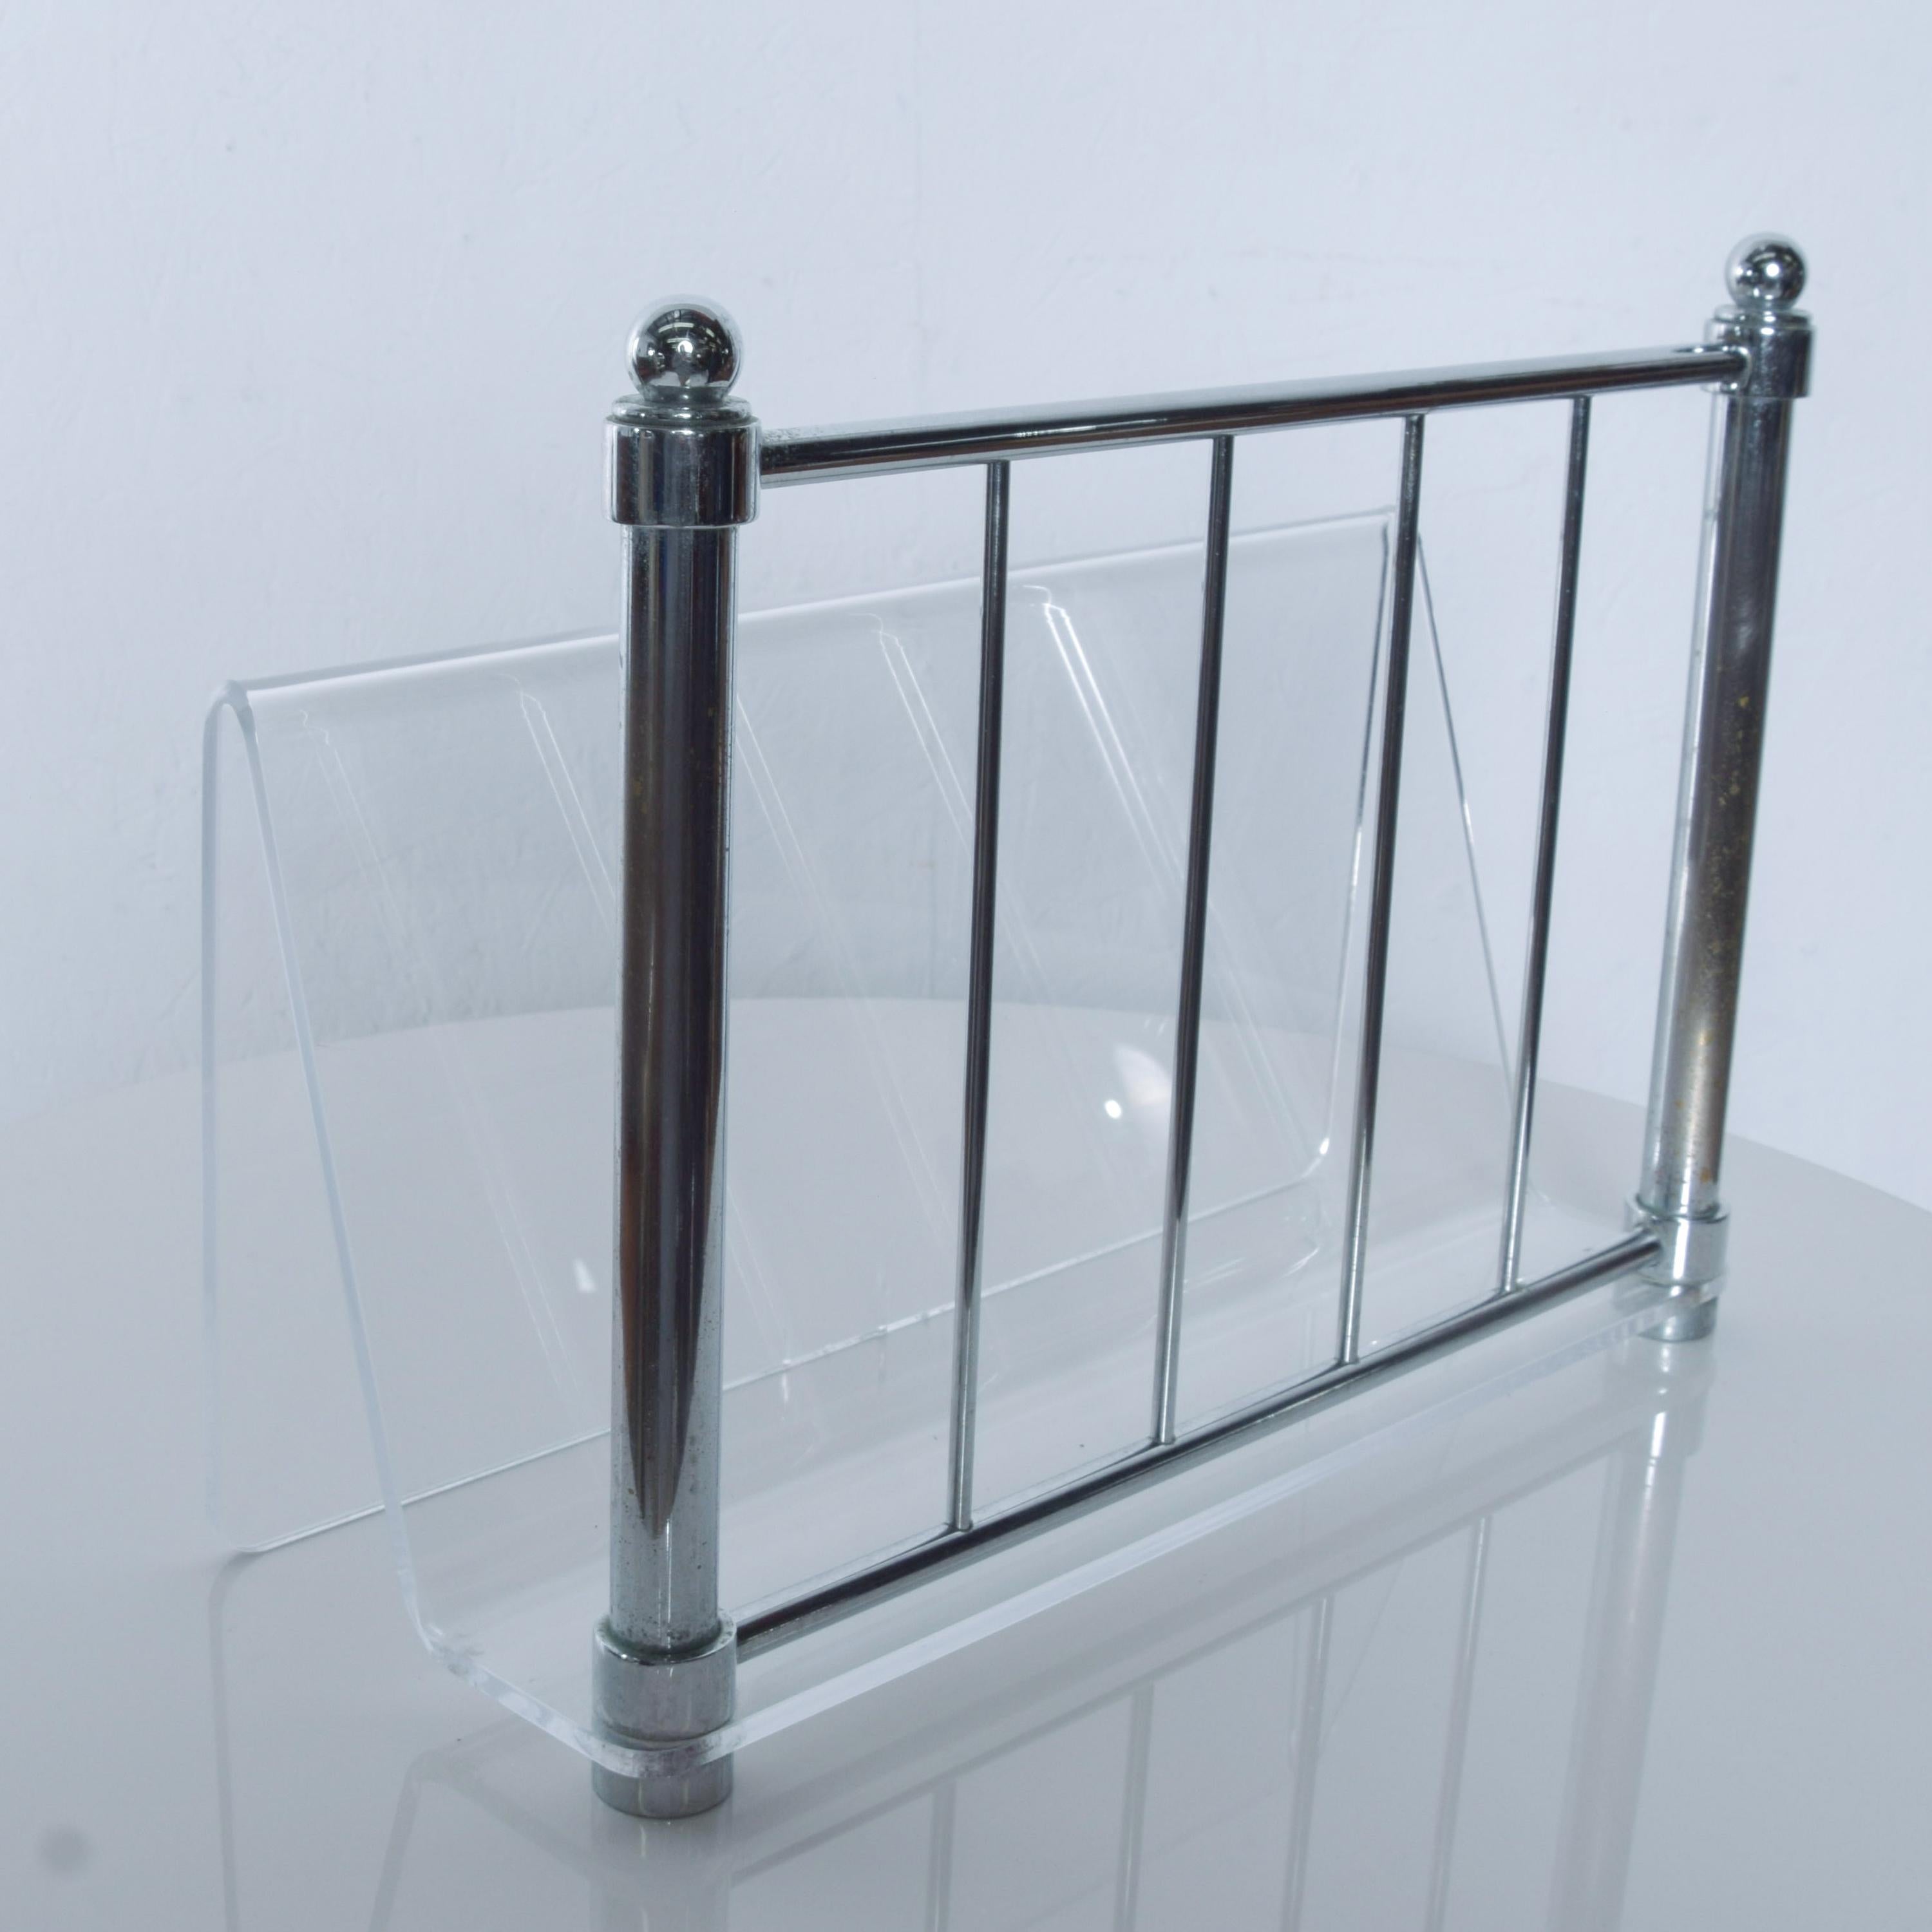 Modern magazine holder chrome-plated rack magazine newspaper stand in Lucite 1970s vintage.
No apparent label, attributed to the era of Charles Hollis Jones.
Measures: 10.38